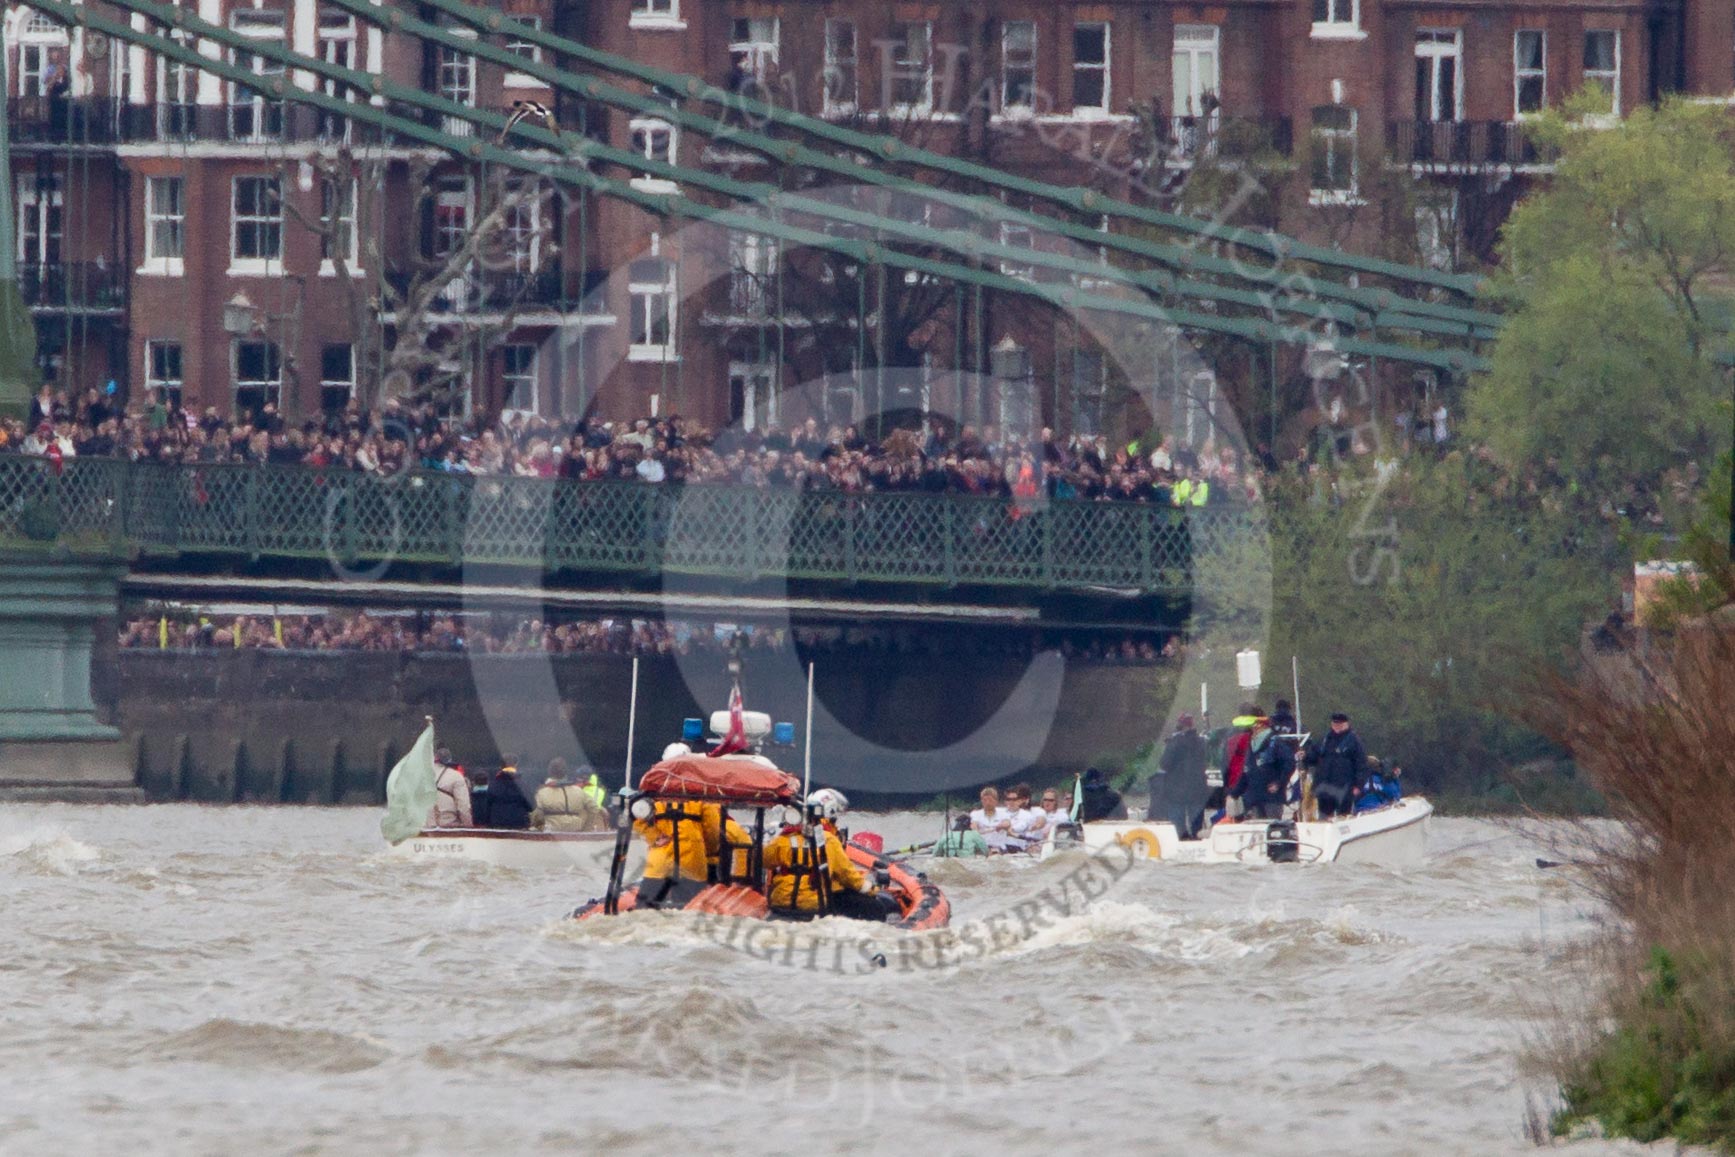 The Boat Race 2012: The 2012 Boat Race, with the boats approaching Hammersmith Bridge: The Cambridge Blue Boat on the left, nearly covered by the boat of the umpire, and the Oxford Blue Boat on the right..




on 07 April 2012 at 14:20, image #304